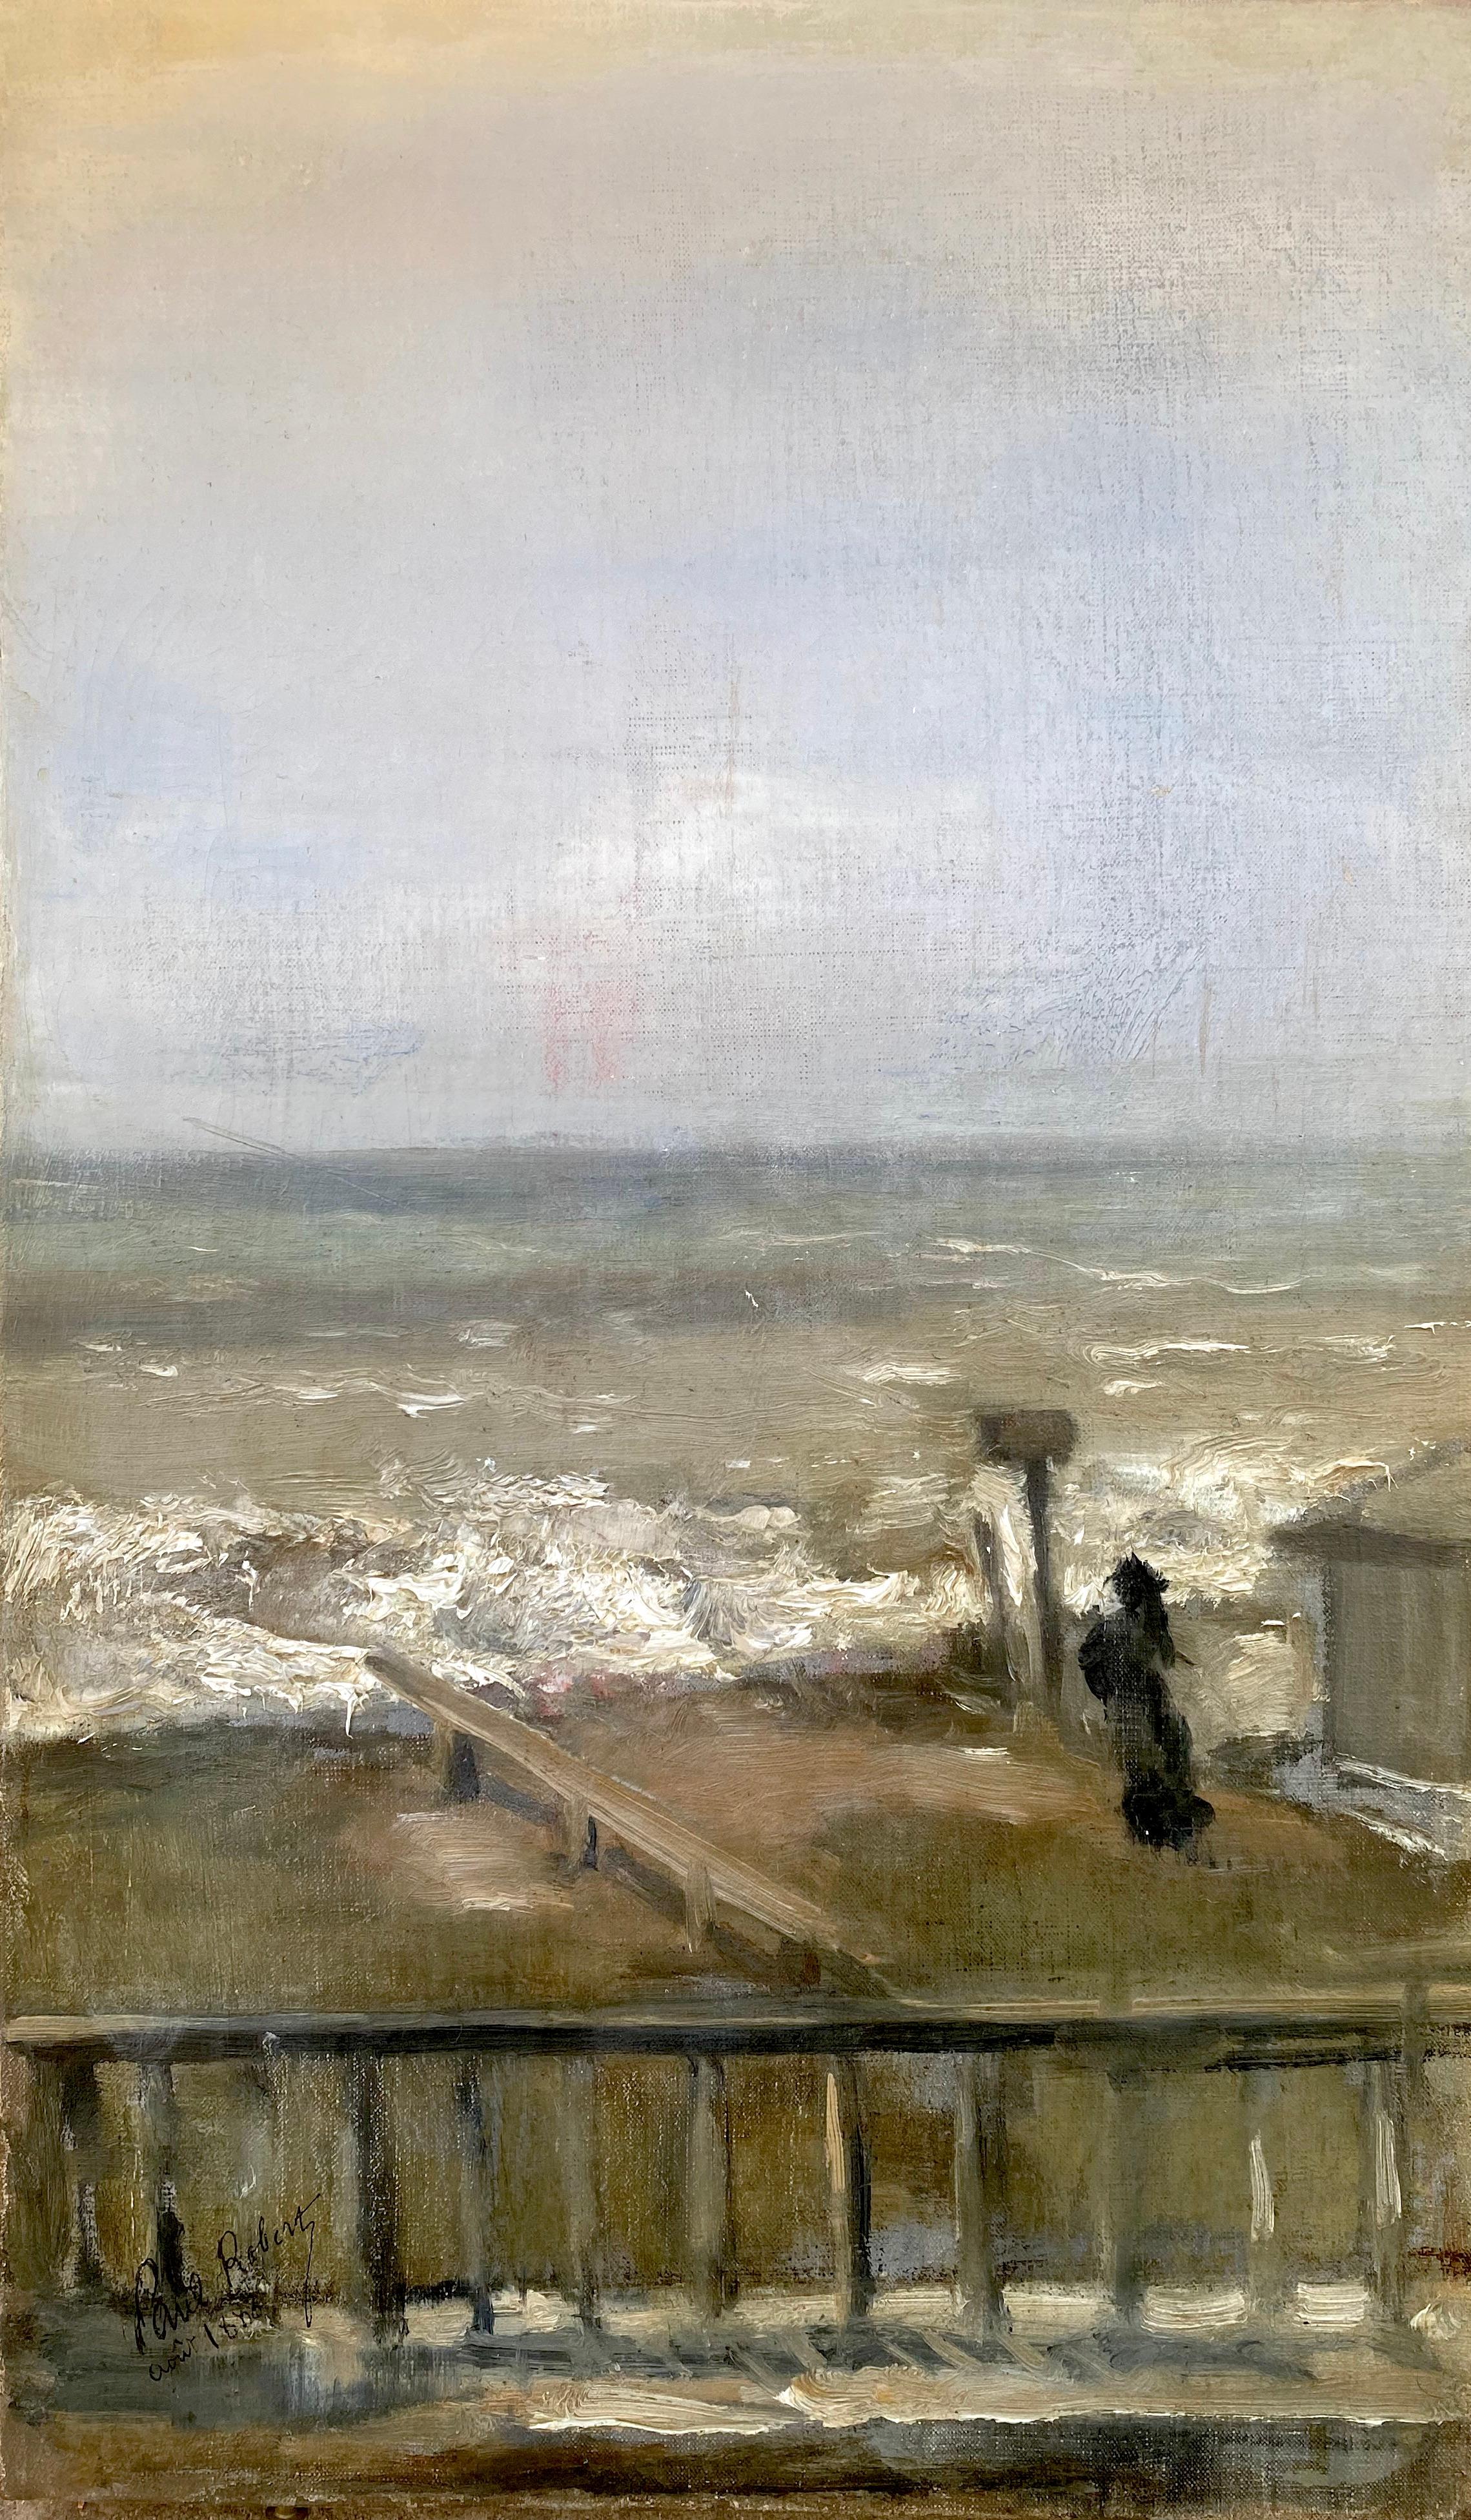 The Woman on the Beach: coastal scene by friend of Degas: gray green blue ocean  - Painting by Paul Robert 